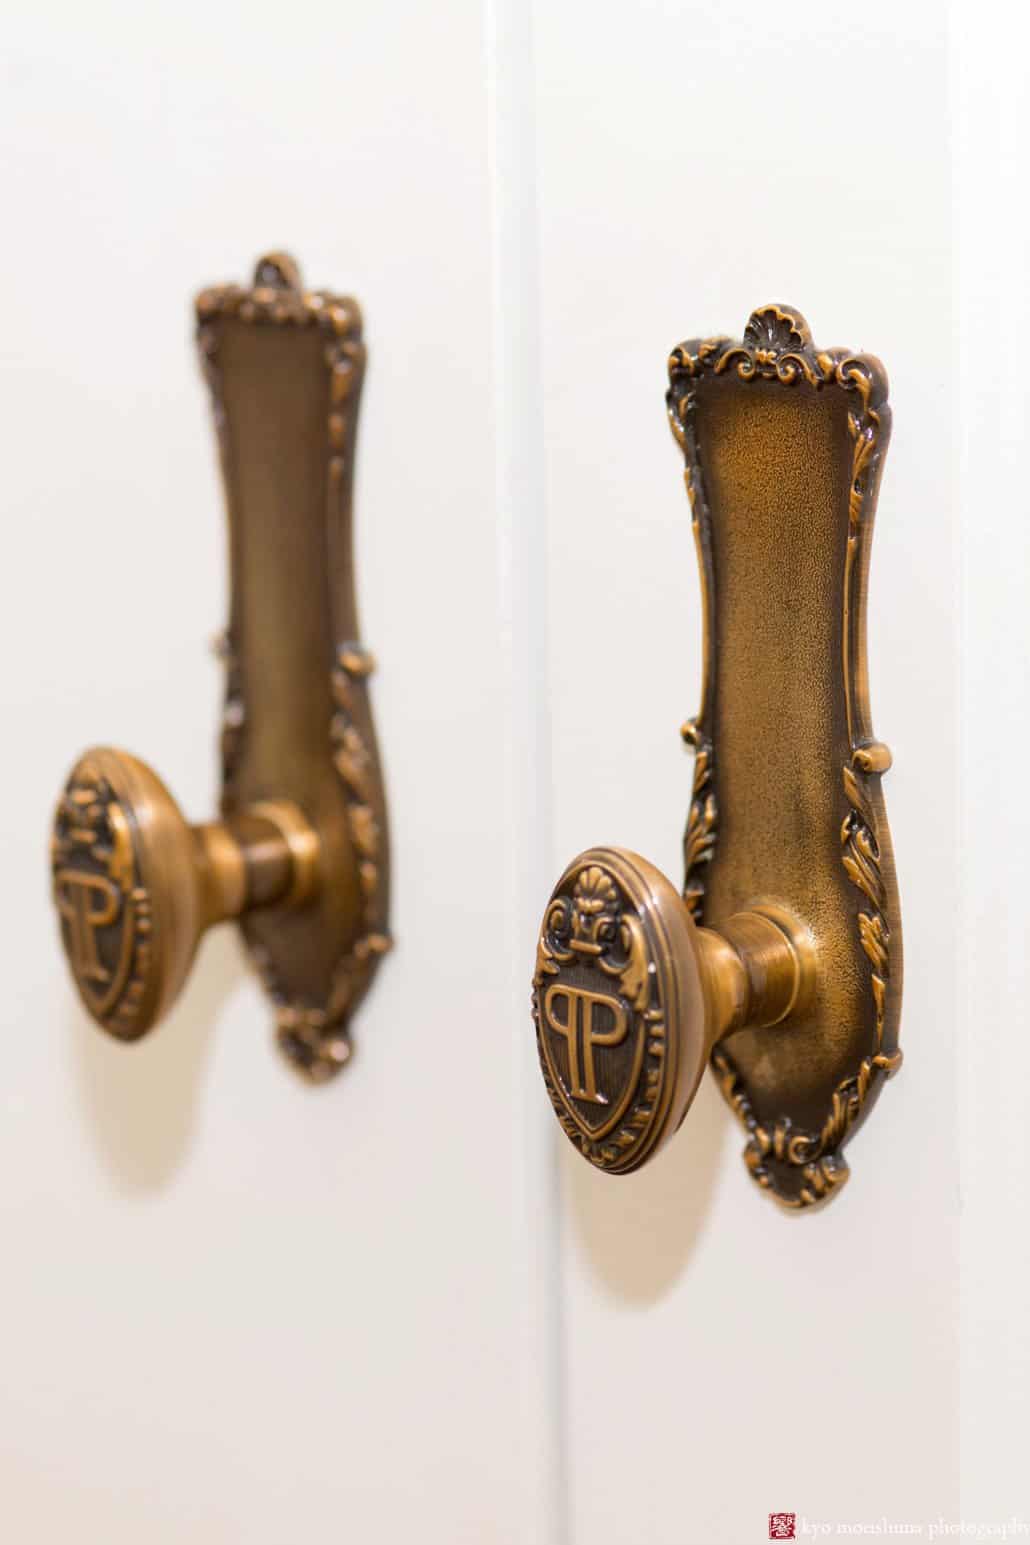 Doorknobs outside Plaza Hotel guest room, photographed by Kyo Morishima